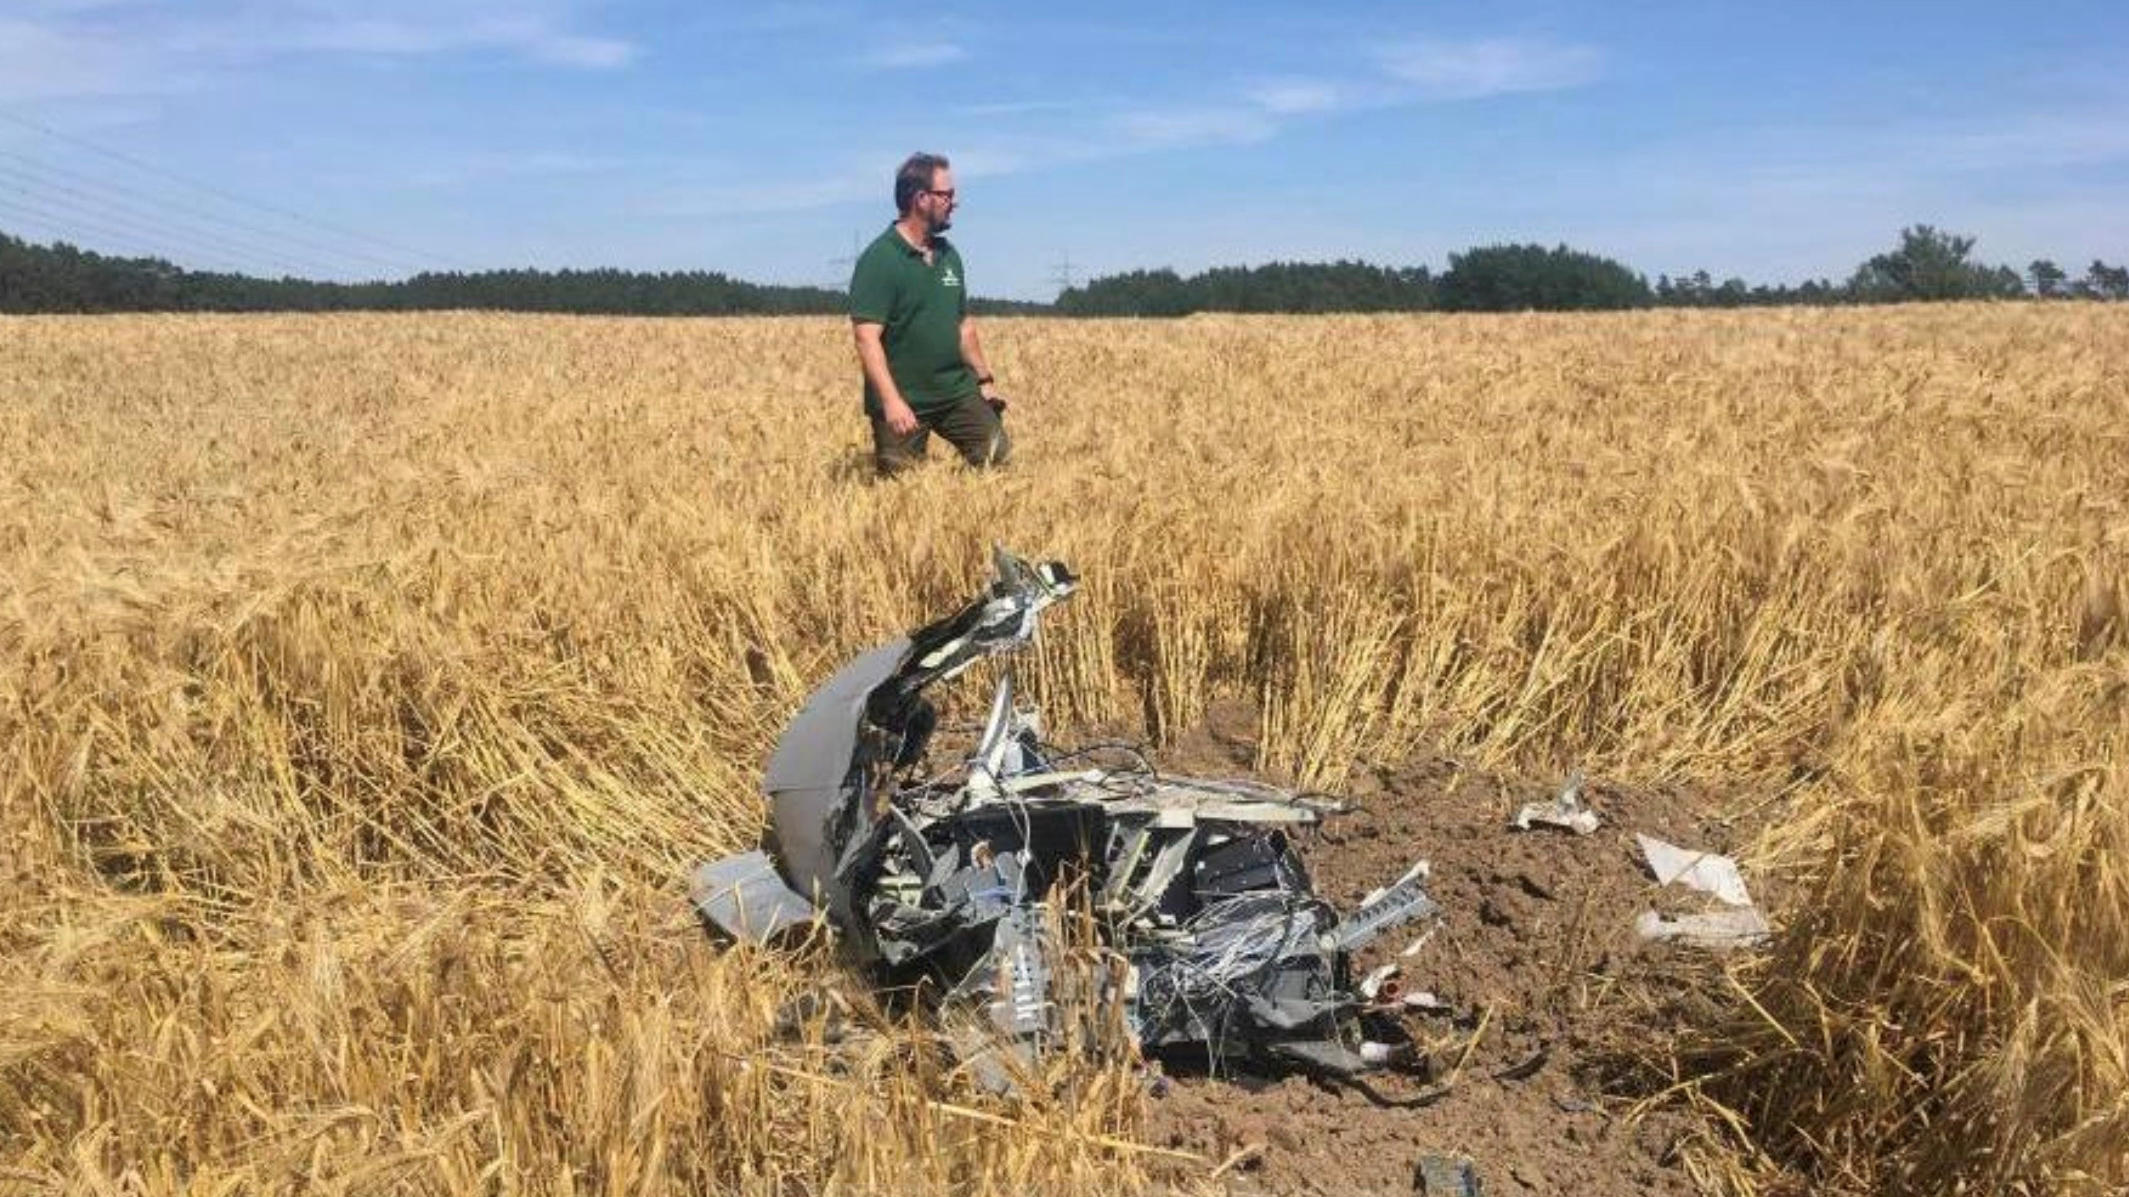 A forest official stands next to debris after two Eurofighter warplanes crashed after a mid-air collision near the village of Jabel in northeastern Germany June 24, 2019  REUTERS/Petra Konermann/Nordkurier NO RESALES. NO ARCHIVES     TPX IMAGES OF TH